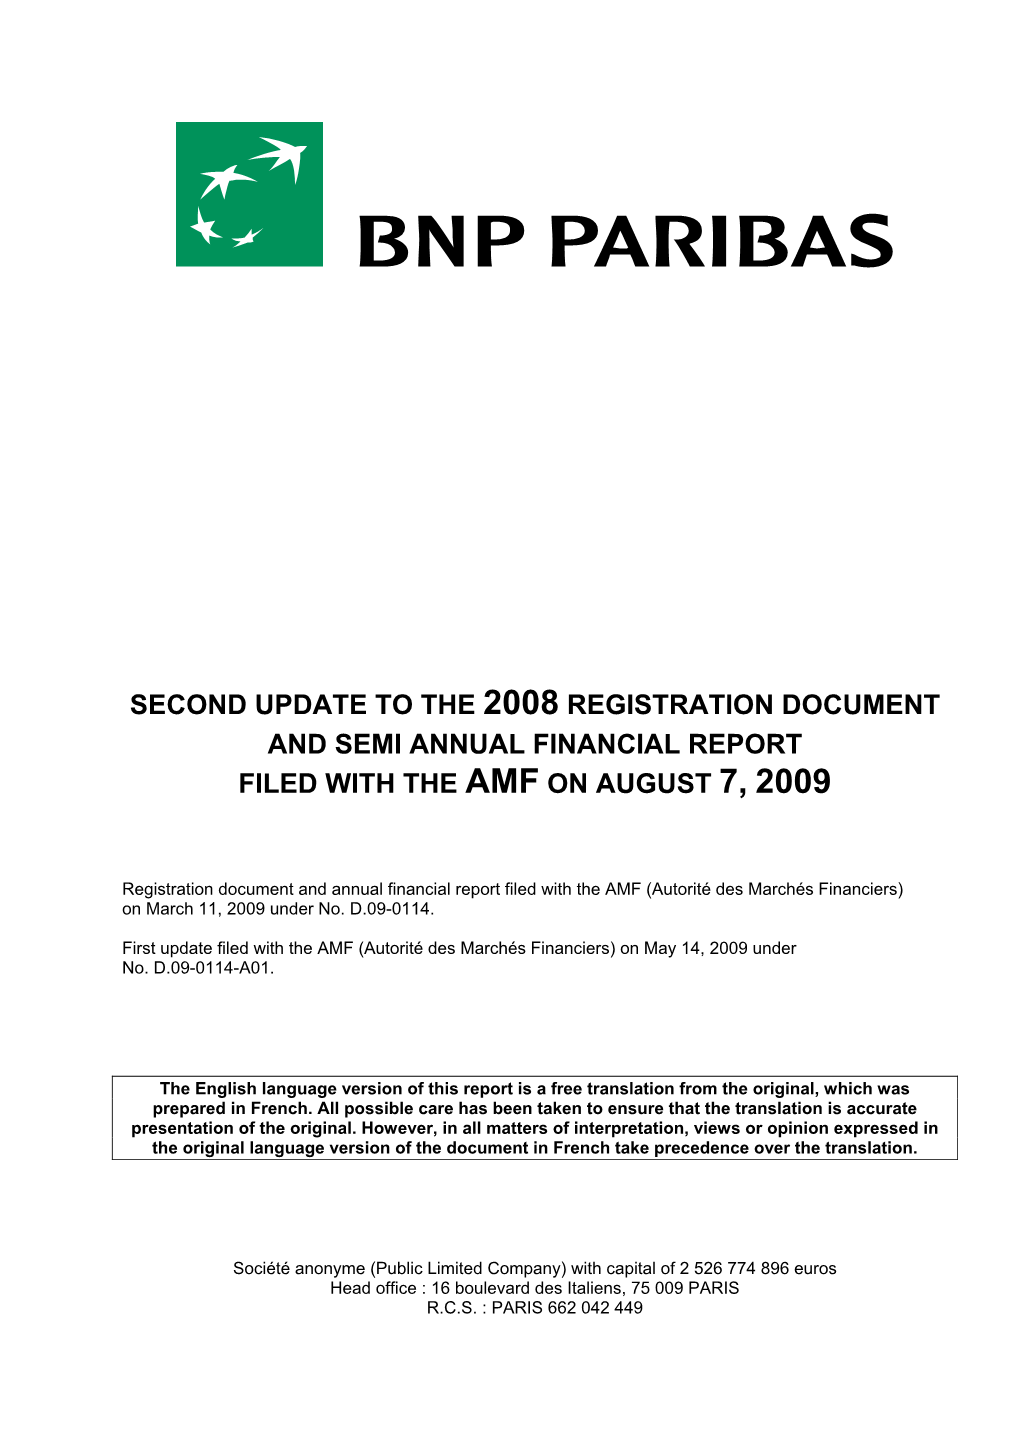 Second Update to the 2008 Registration Document and Semi Annual Financial Report Filed with the Amf on August 7, 2009